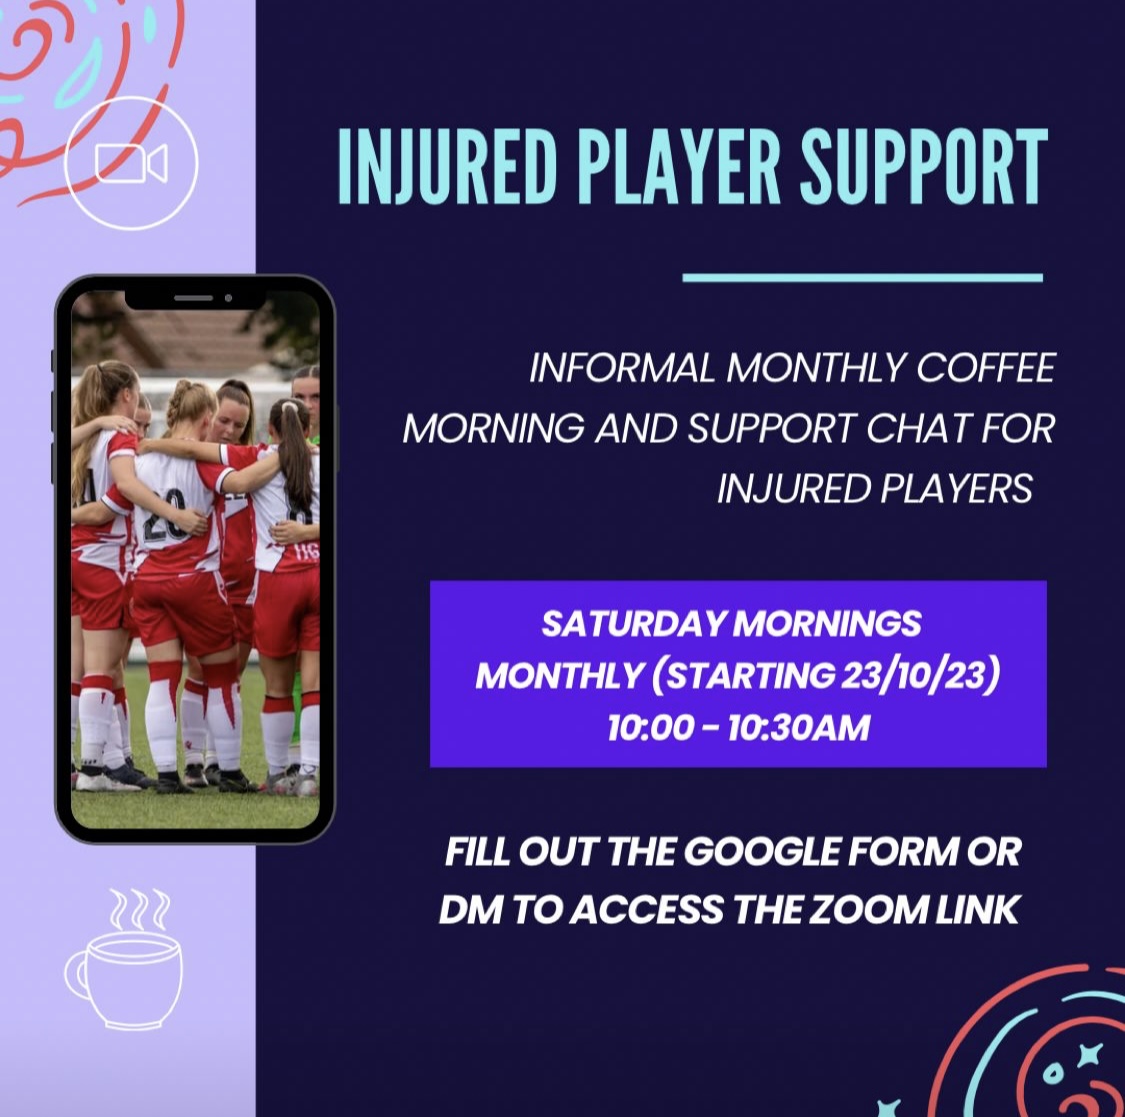 Injured player online support chat (registration) thumbnail